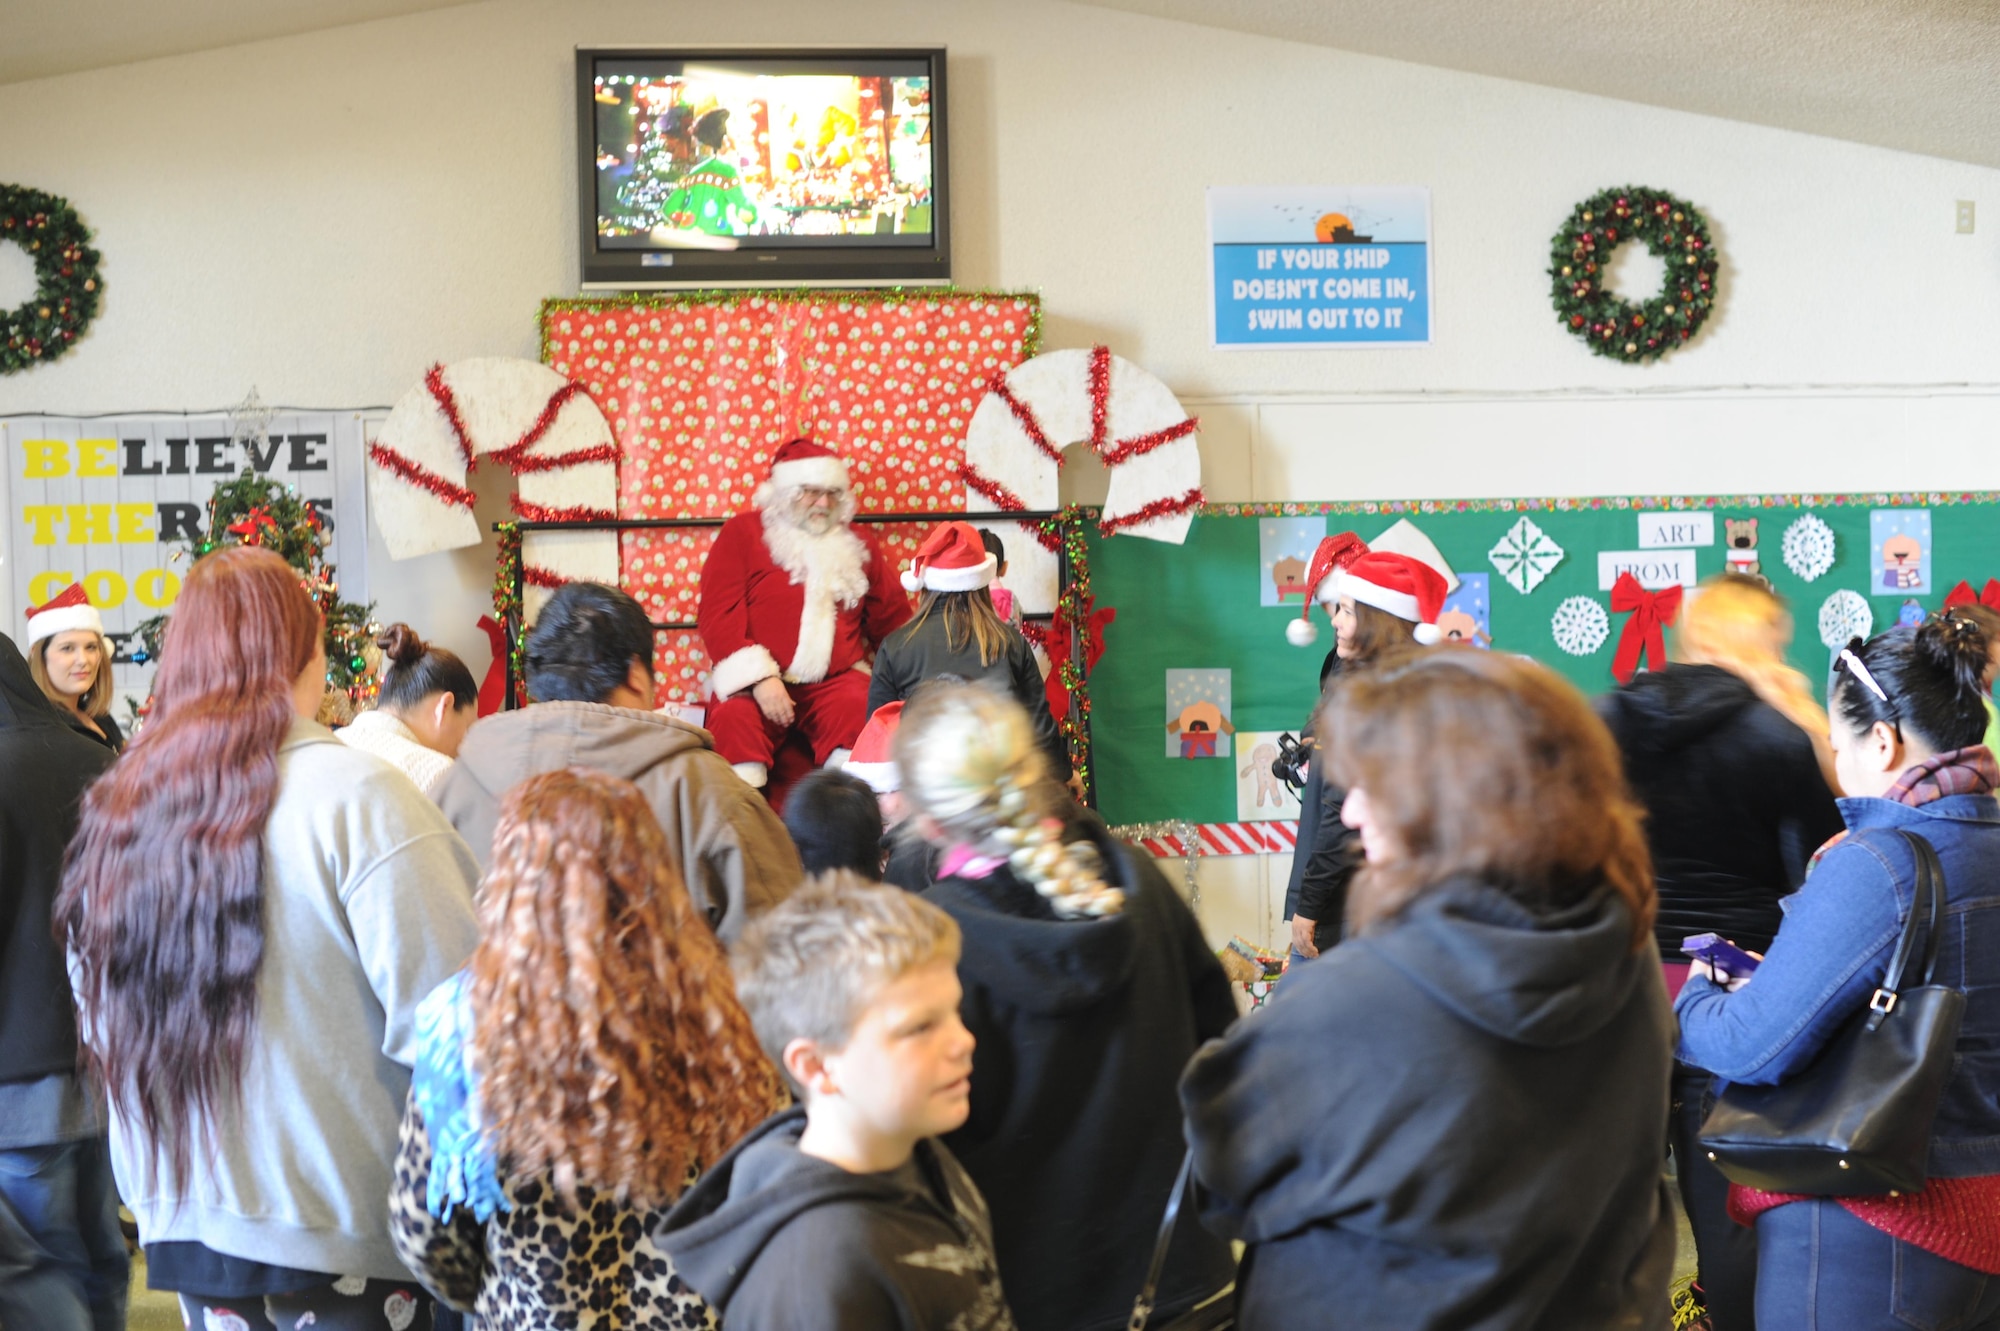 A crowd waits in line to meet Santa Claus Dec. 20, 2016, at Cedar Lane Elementary School in Olivehurst, California. Marysville Joint Unified School District’s homeless students and their families attended Breakfast with Santa and received hot breakfast and gifts donated by the community. (U.S. Air Force photo by Senior Airman Tara R. Abrahams)